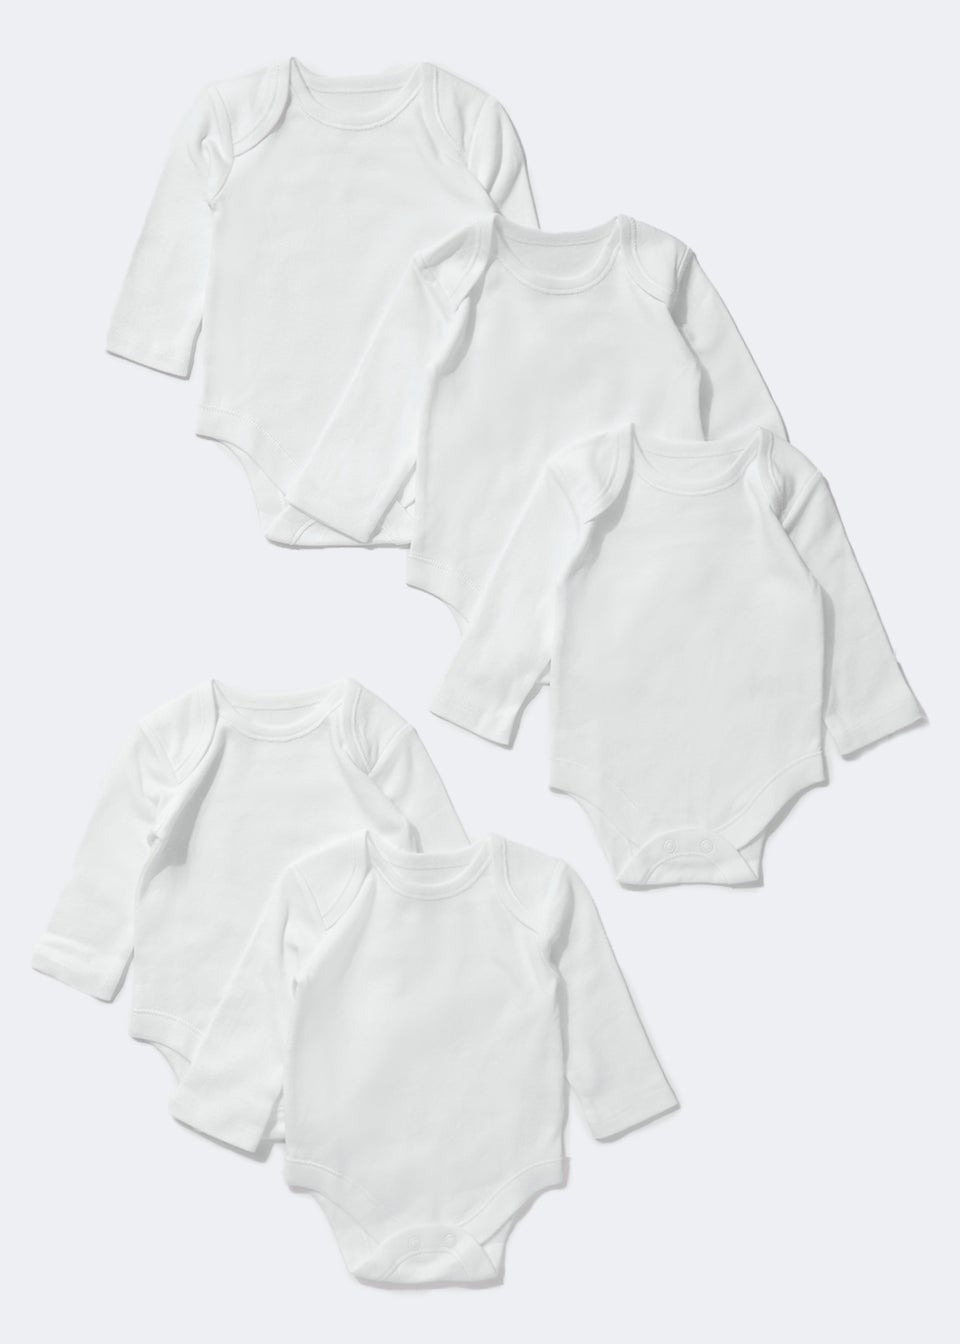 Baby 5 Pack White Long Sleeve Bodysuits (Tiny Baby-23mths)